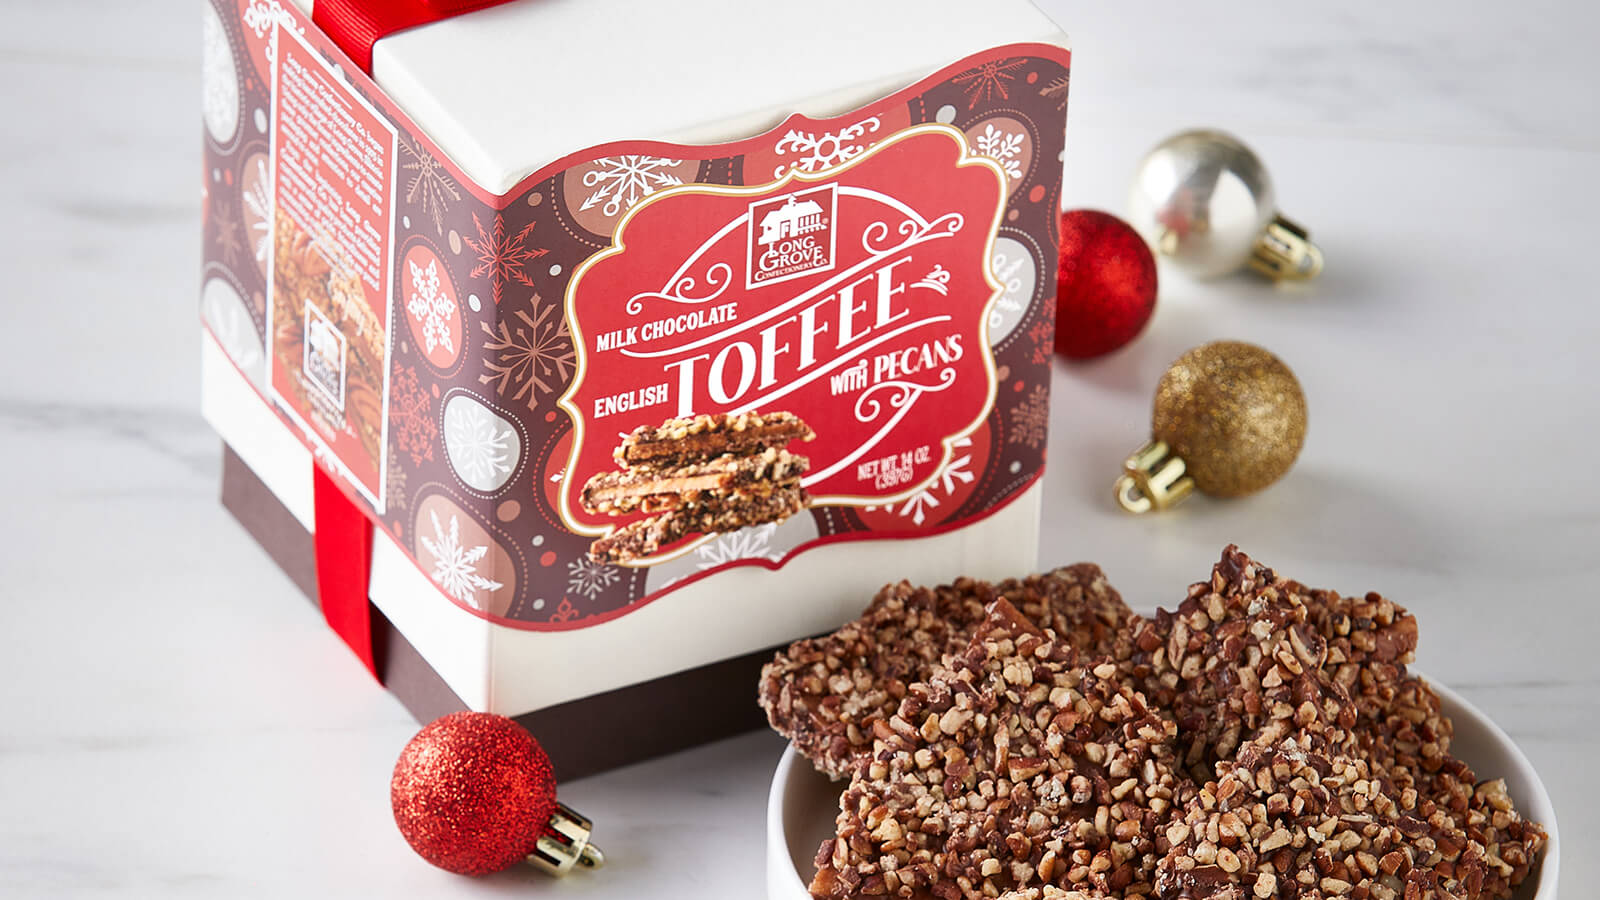 Long Grove Confectionary Co. English Toffee With Pecans